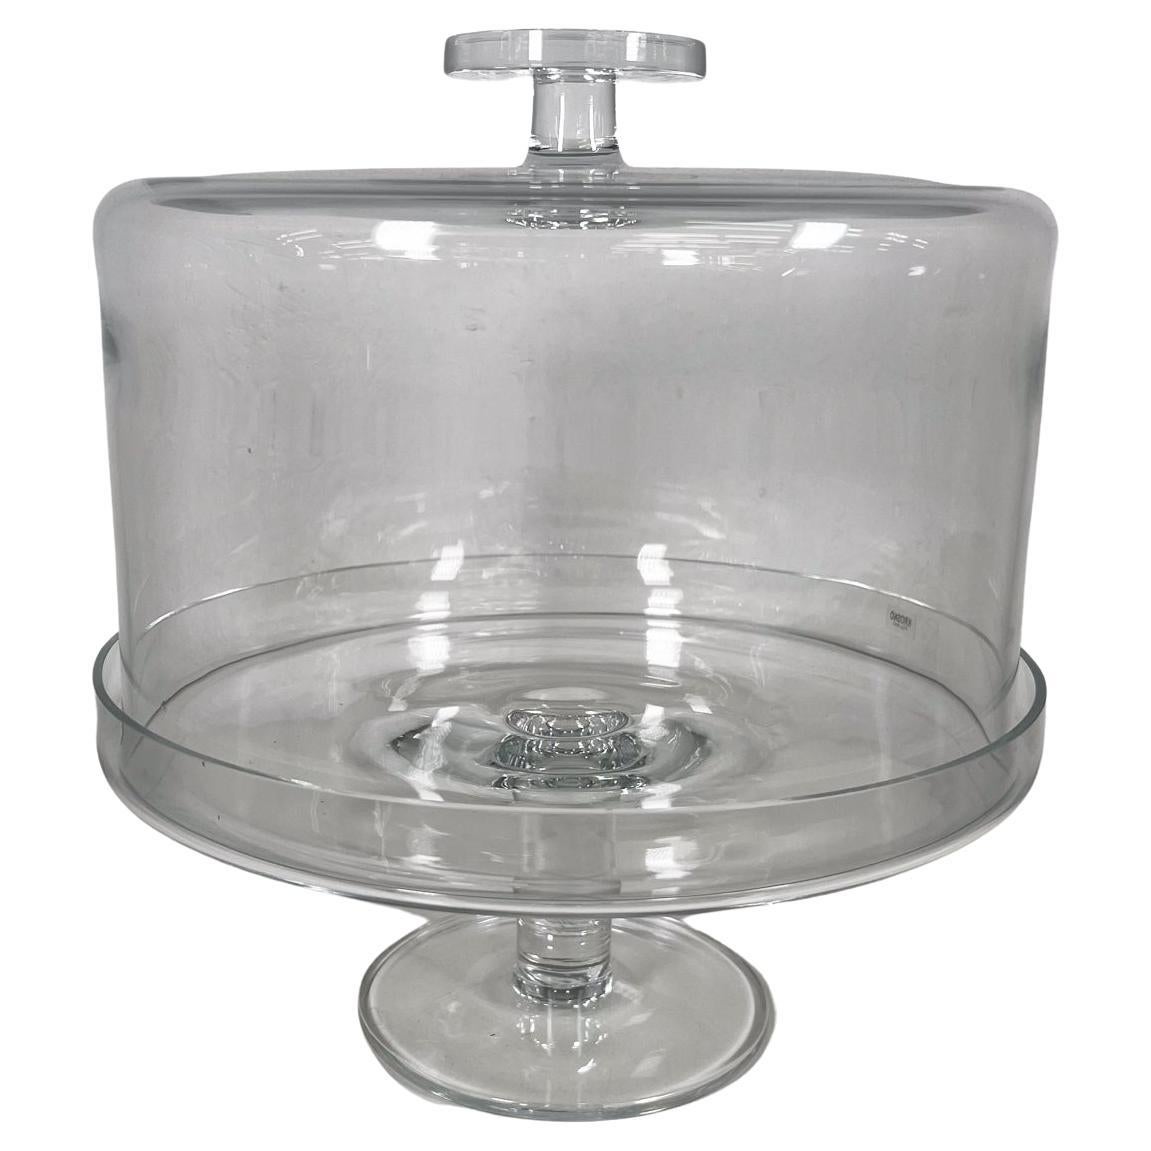 Exquisite Modern Large Domed Pedestal Glass Cake Stand